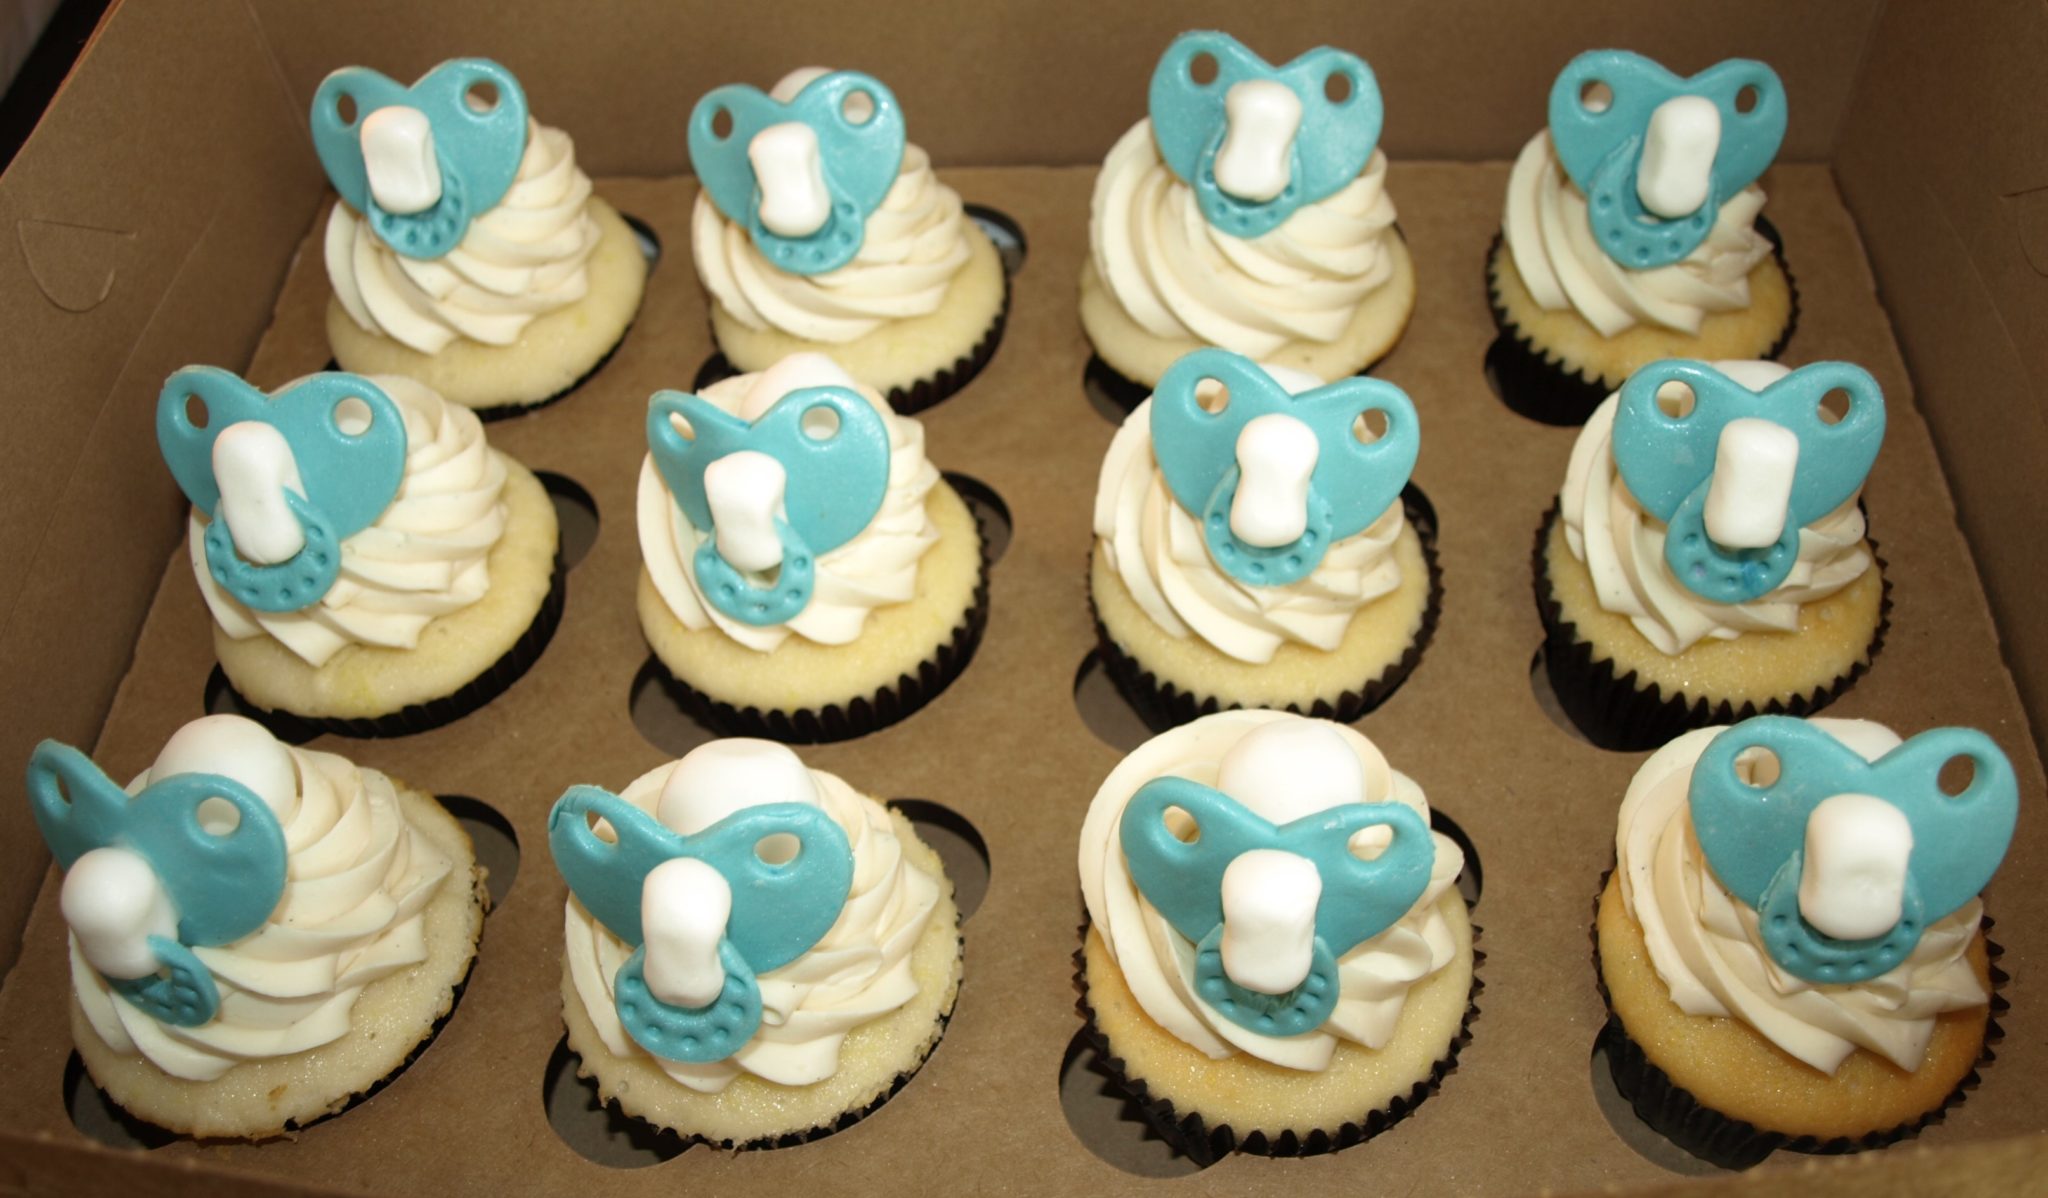 70 Baby Shower Cakes And Cupcakes Ideas For Girls And Boys